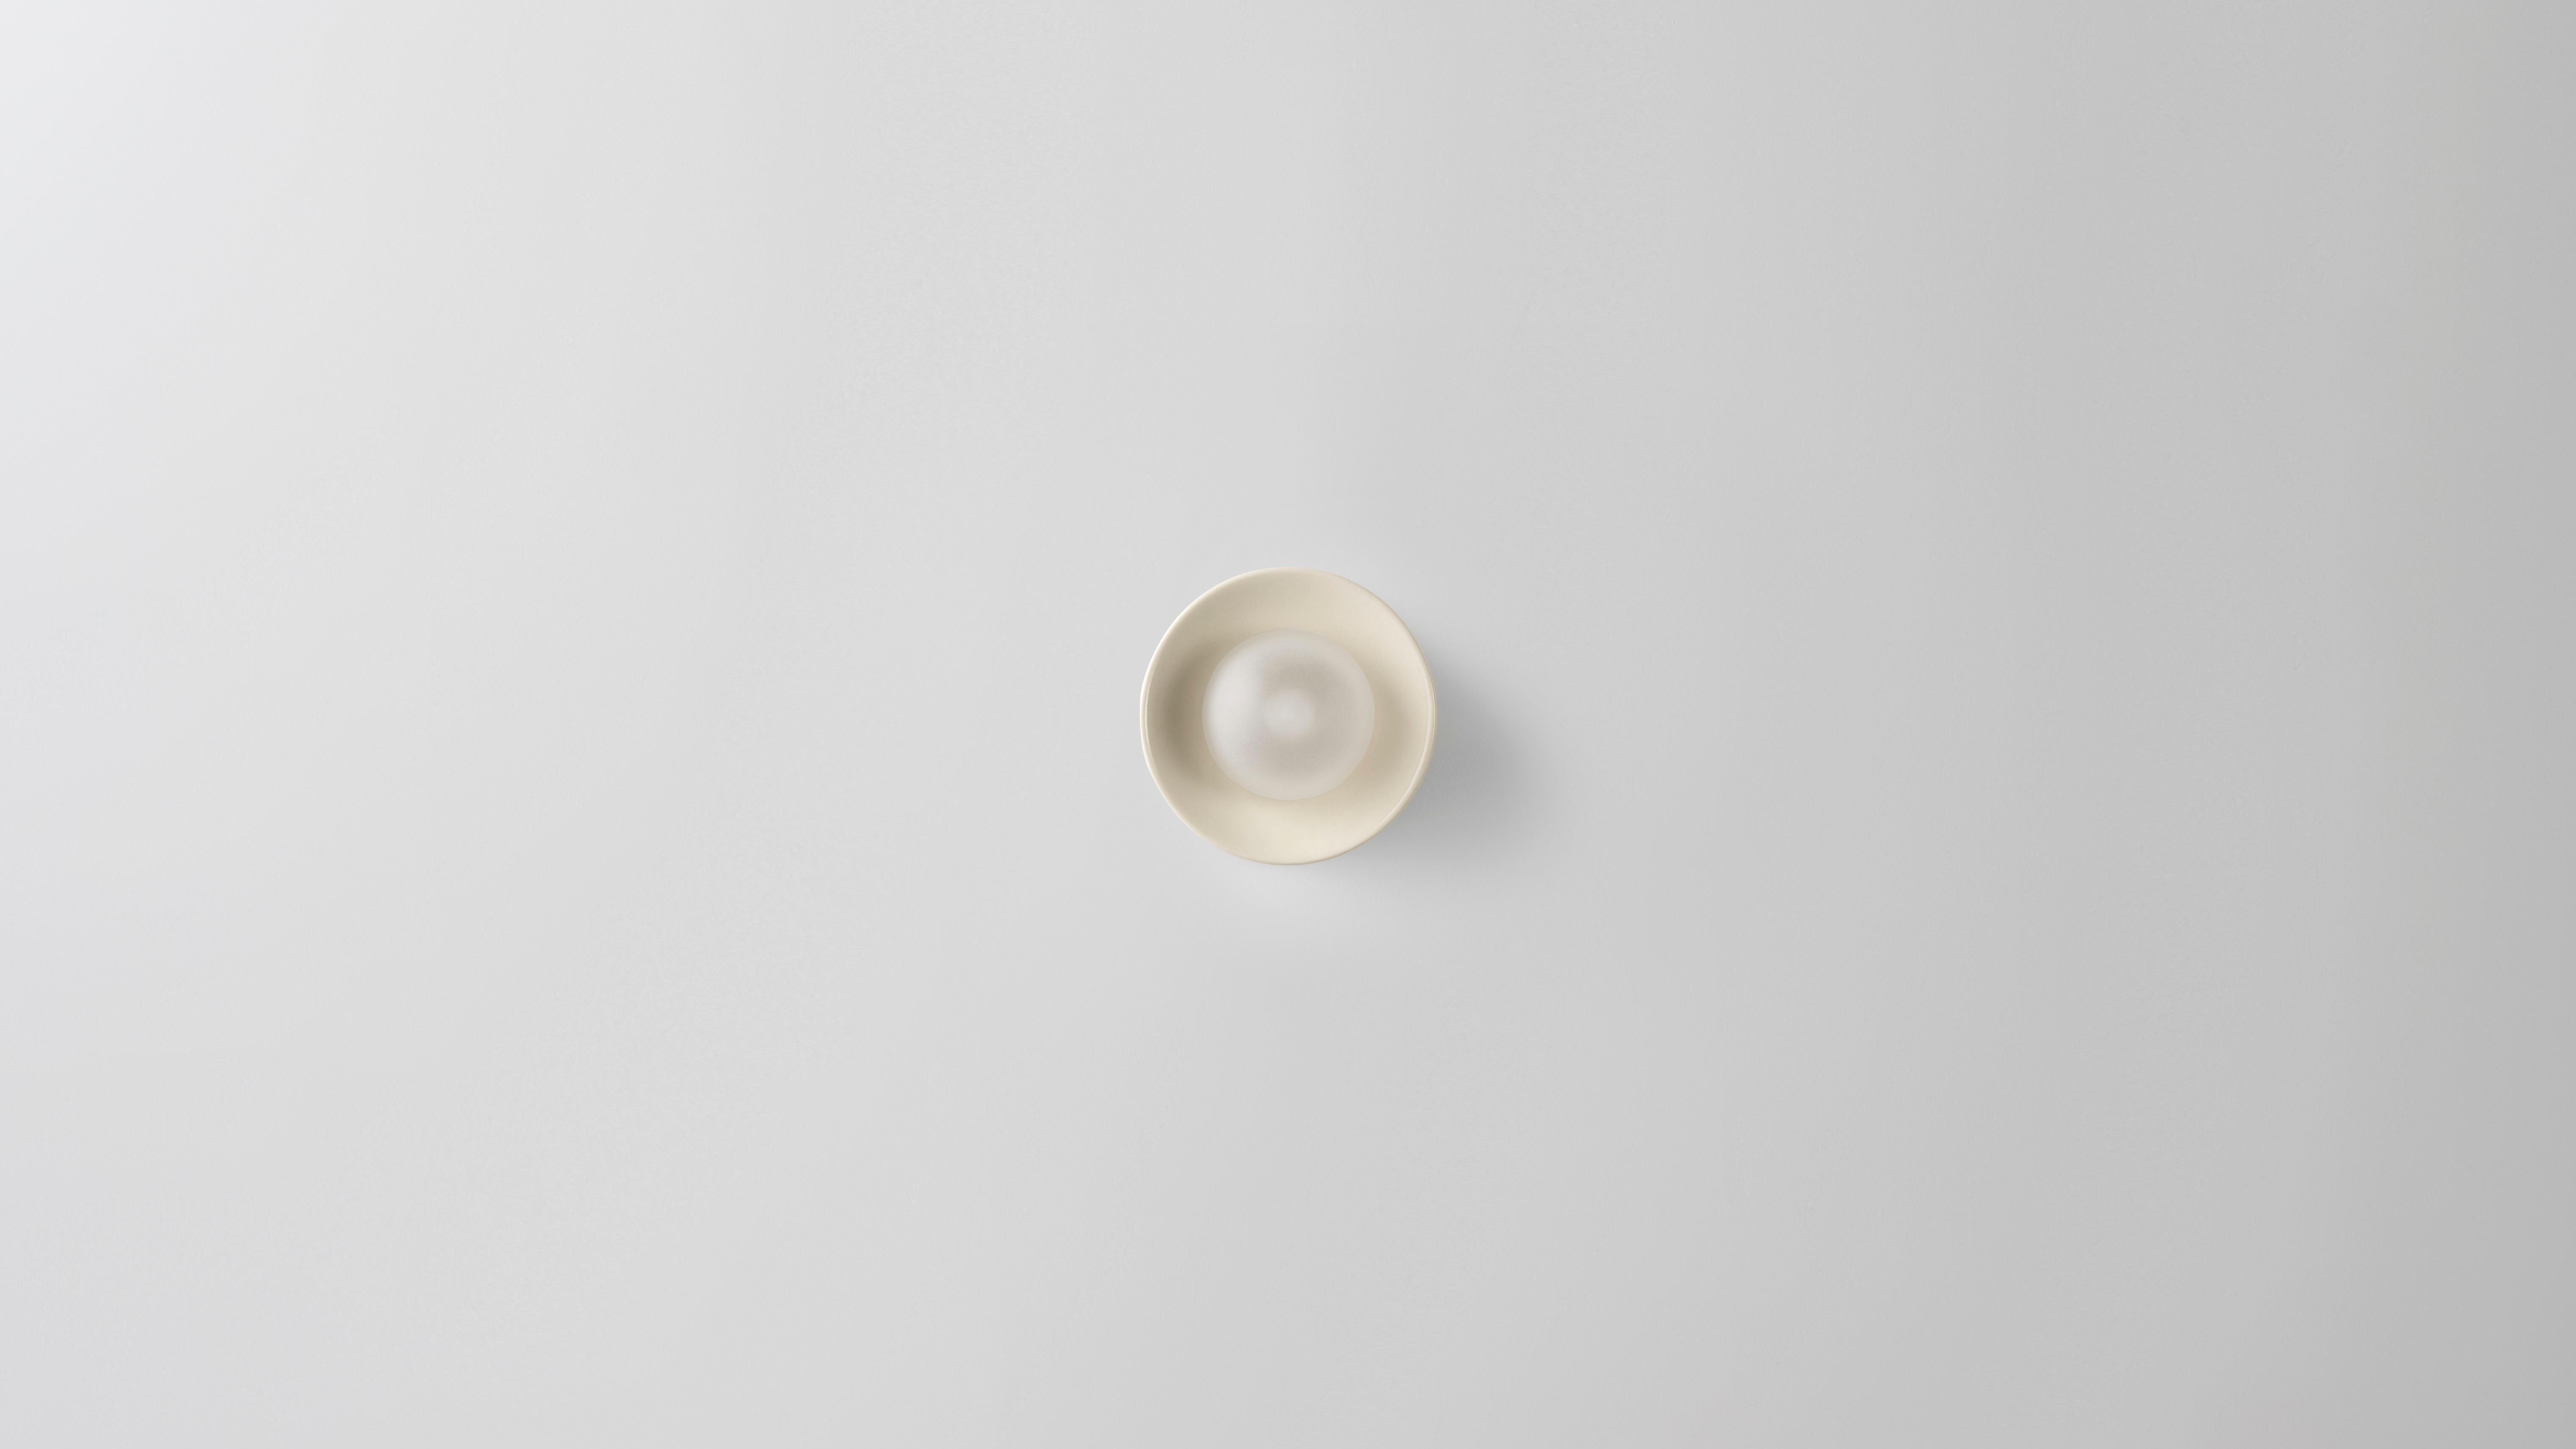 Micro ceramic anton wall sconce by Volker Haug.
Dimensions: Ø 8 x D 6 cm. 
Material: cast ceramic. 
Finish: glazed clear, brown, or crisp white.
Lamp: G9 LED (240V / 120V US). 12V option is available.
Glass Bulb: 45mm ø, Frosted
Weight: